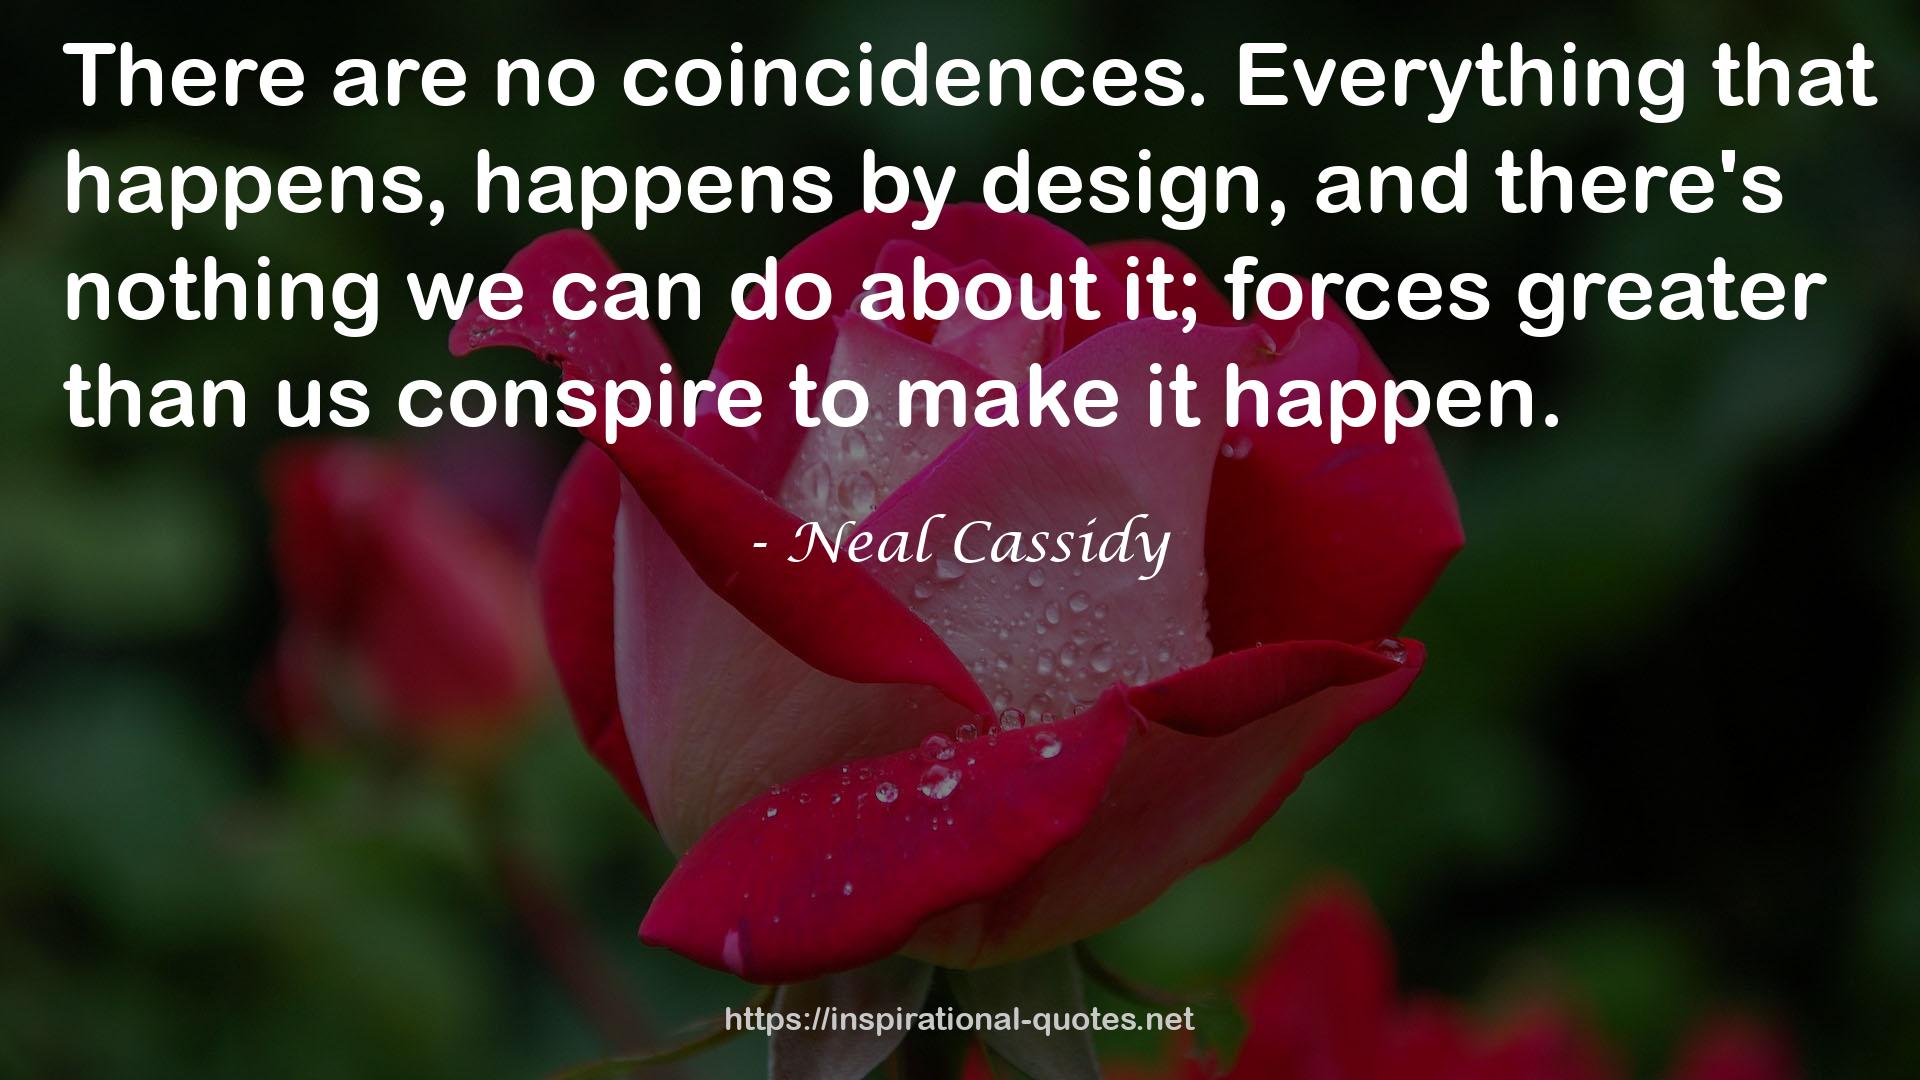 Neal Cassidy QUOTES